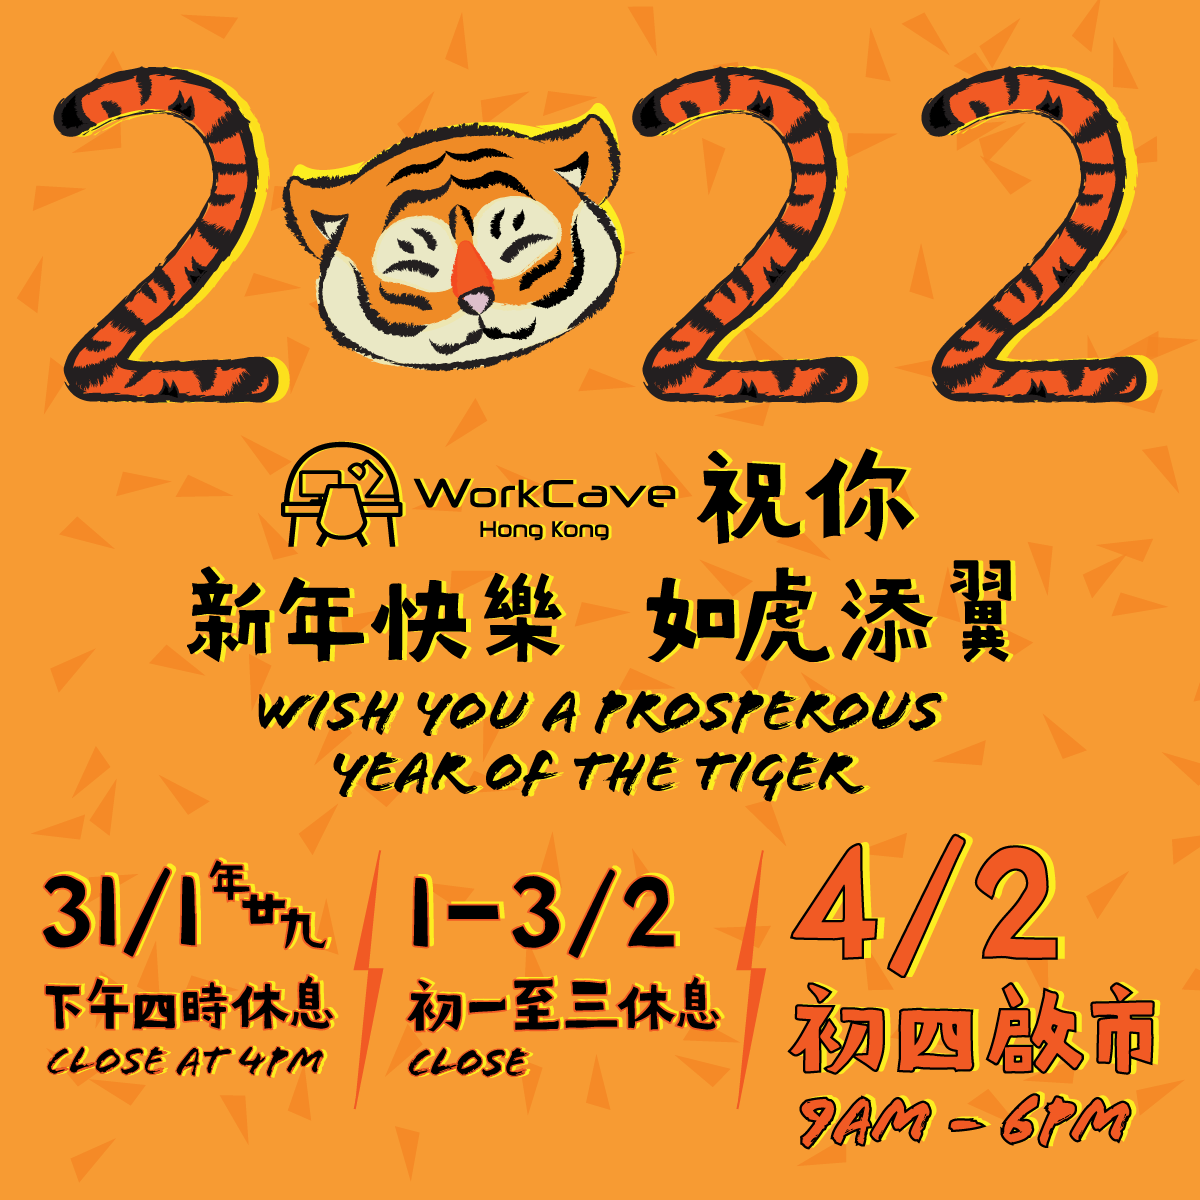 Year of the Tiger, Special Working Hours Notice with orange background, 2022 symbol and smiling cutie tiger